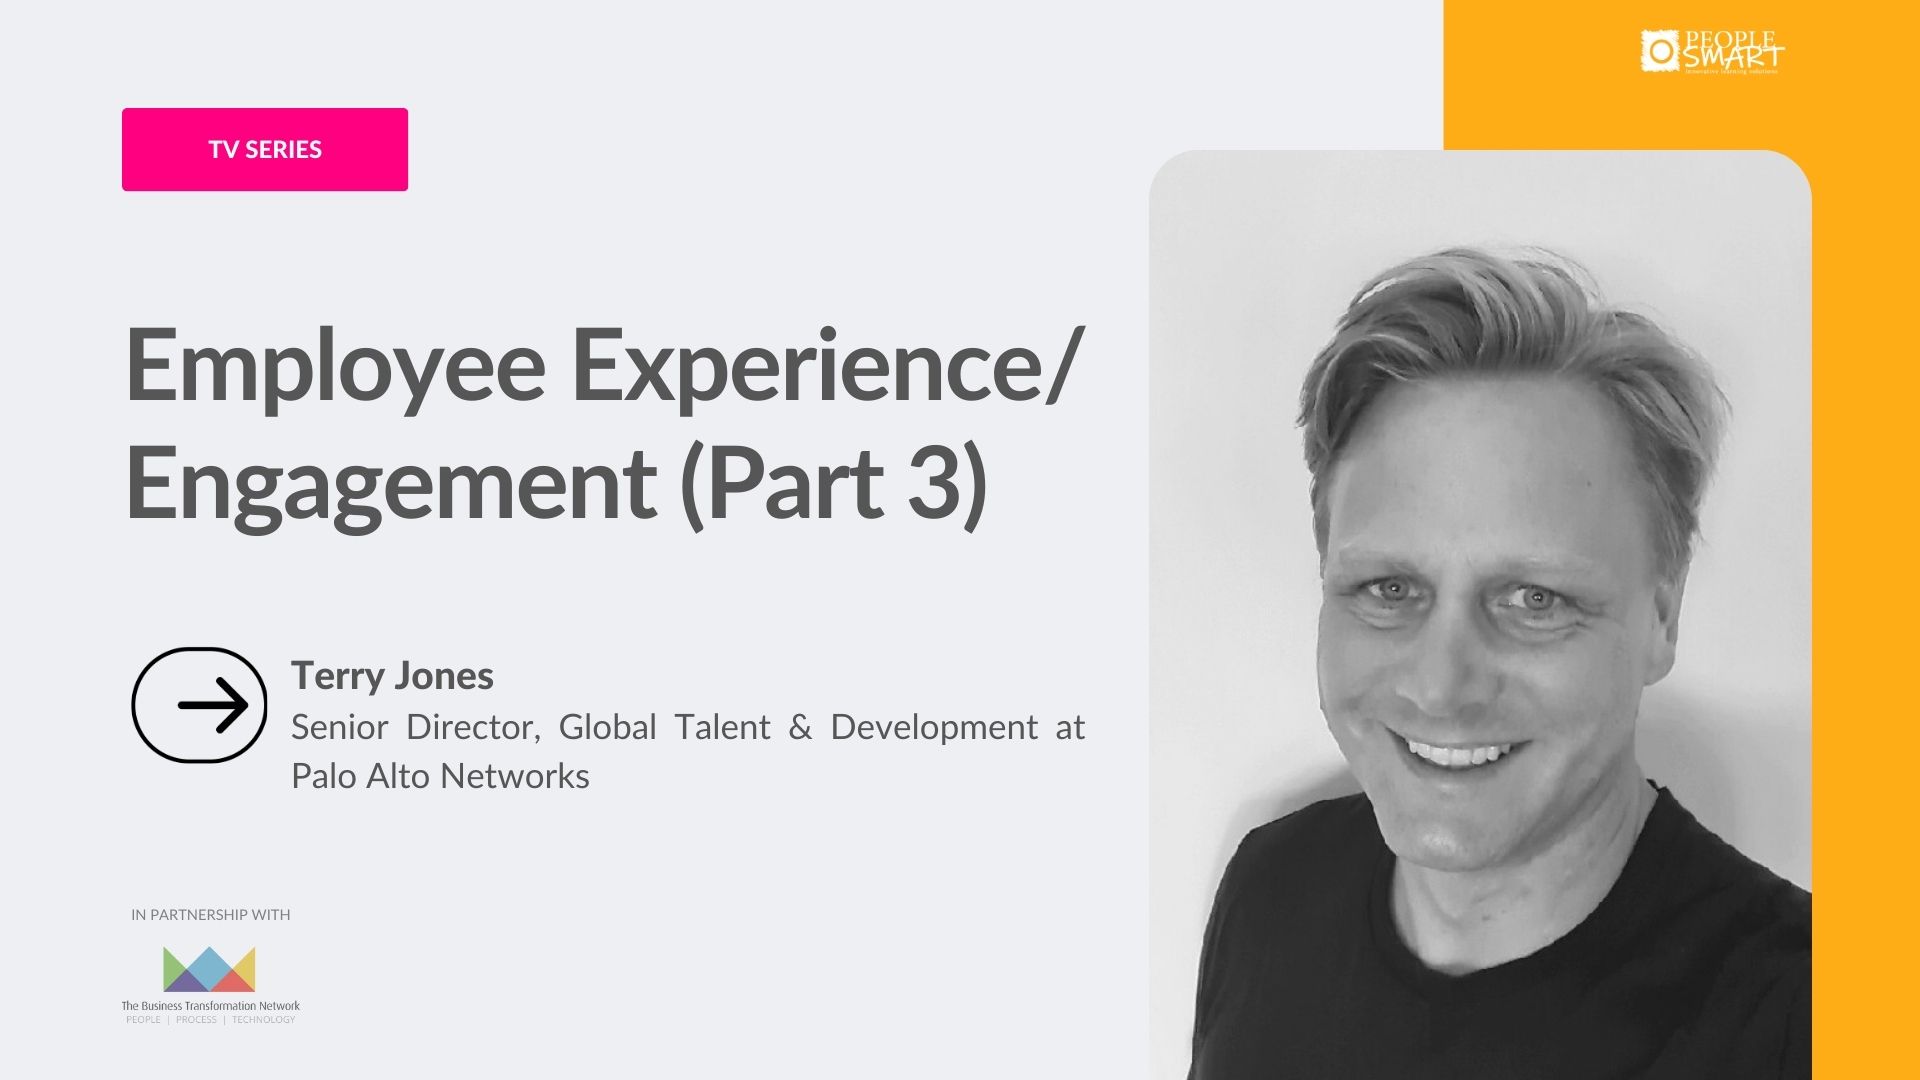 Employee Experience/Engagement with Terry Jones – Part 3